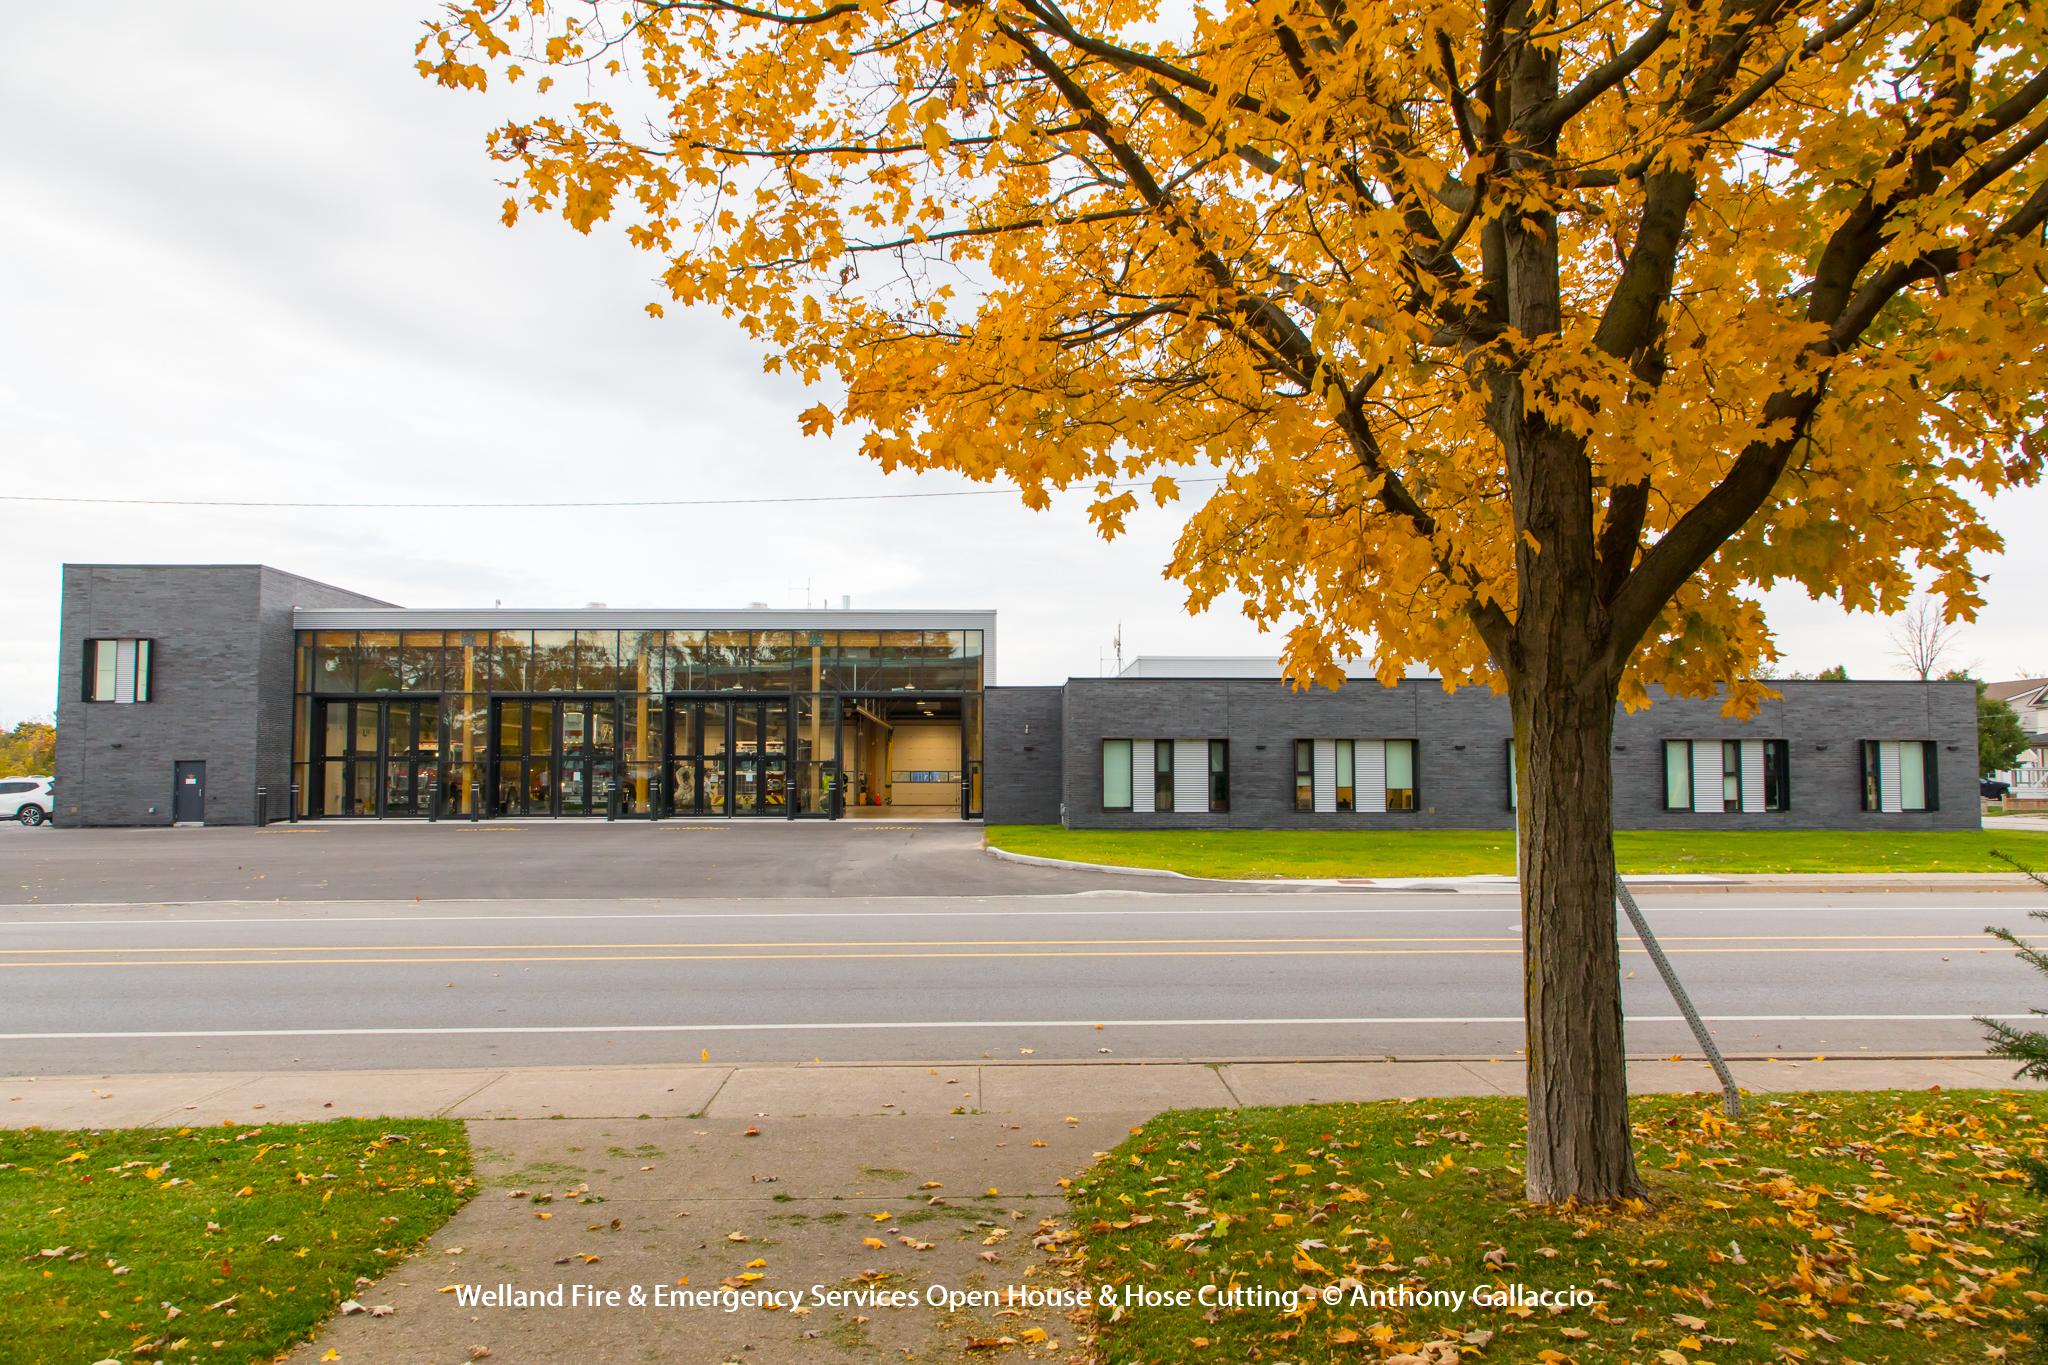 New fire station headquarters a finalist in the Refocus category of this year’s Brownie Awards